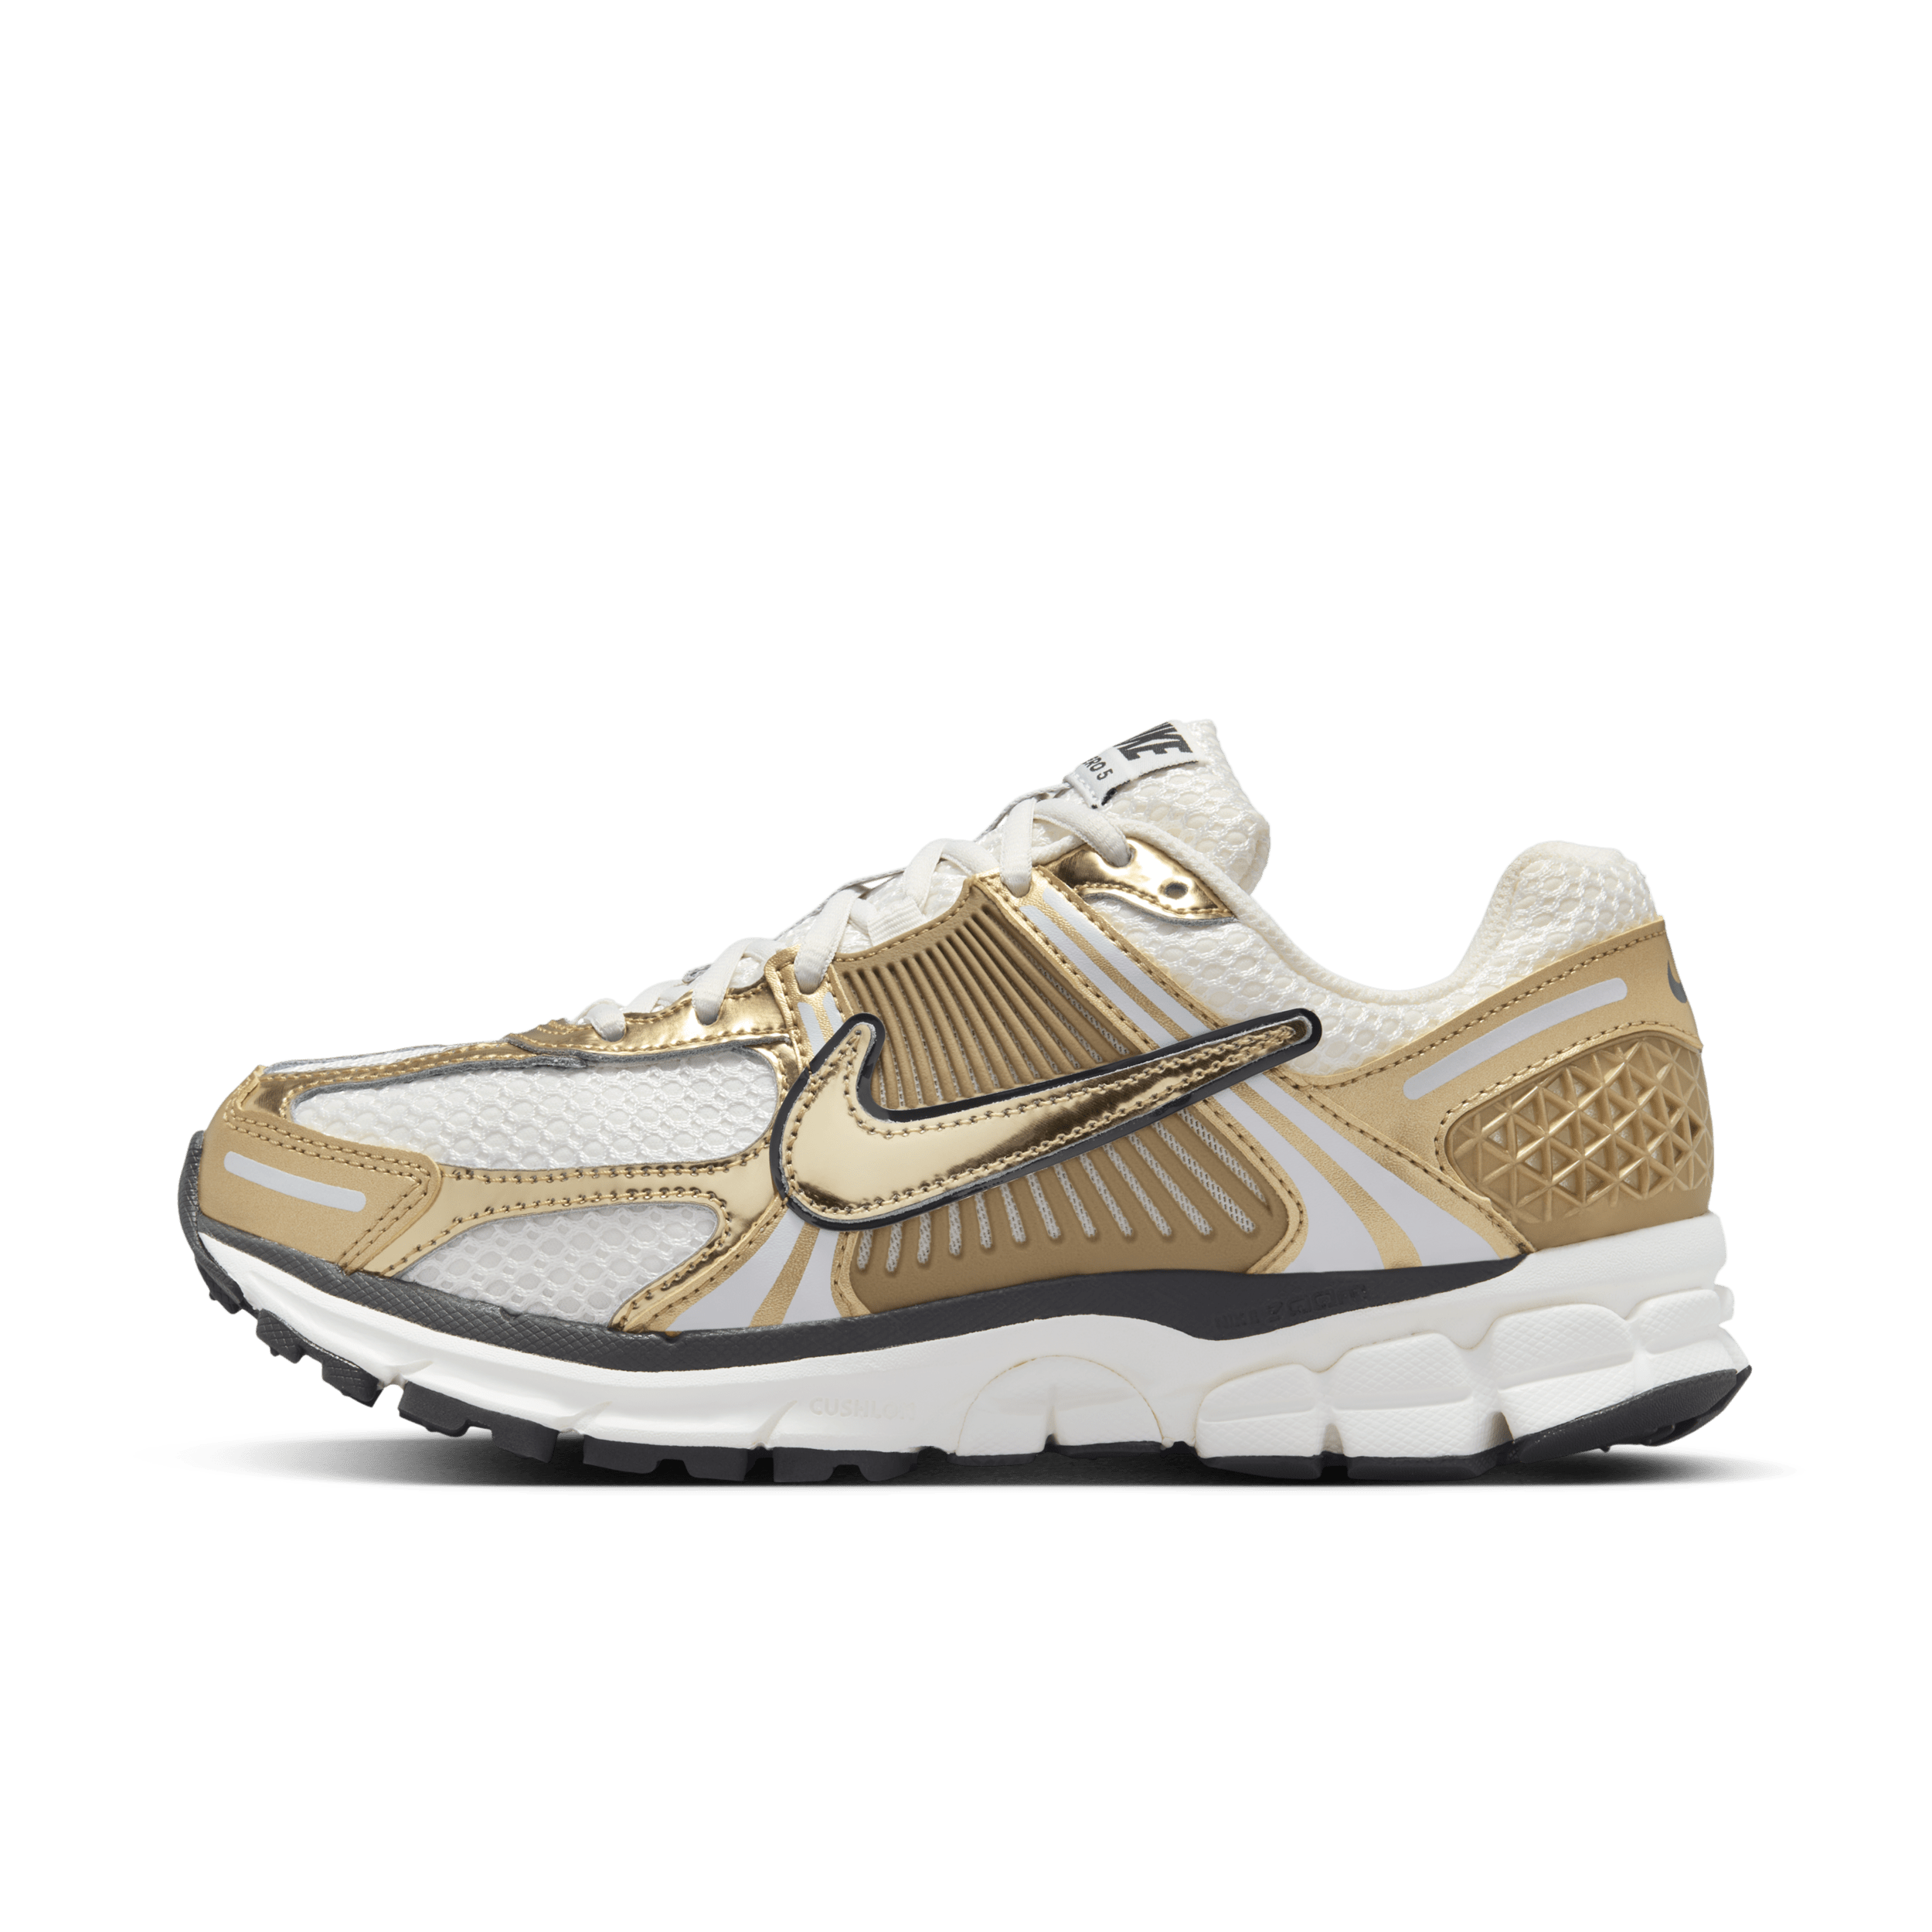 Chaussure Nike Zoom Vomero 5 Gold pour femme - Gris